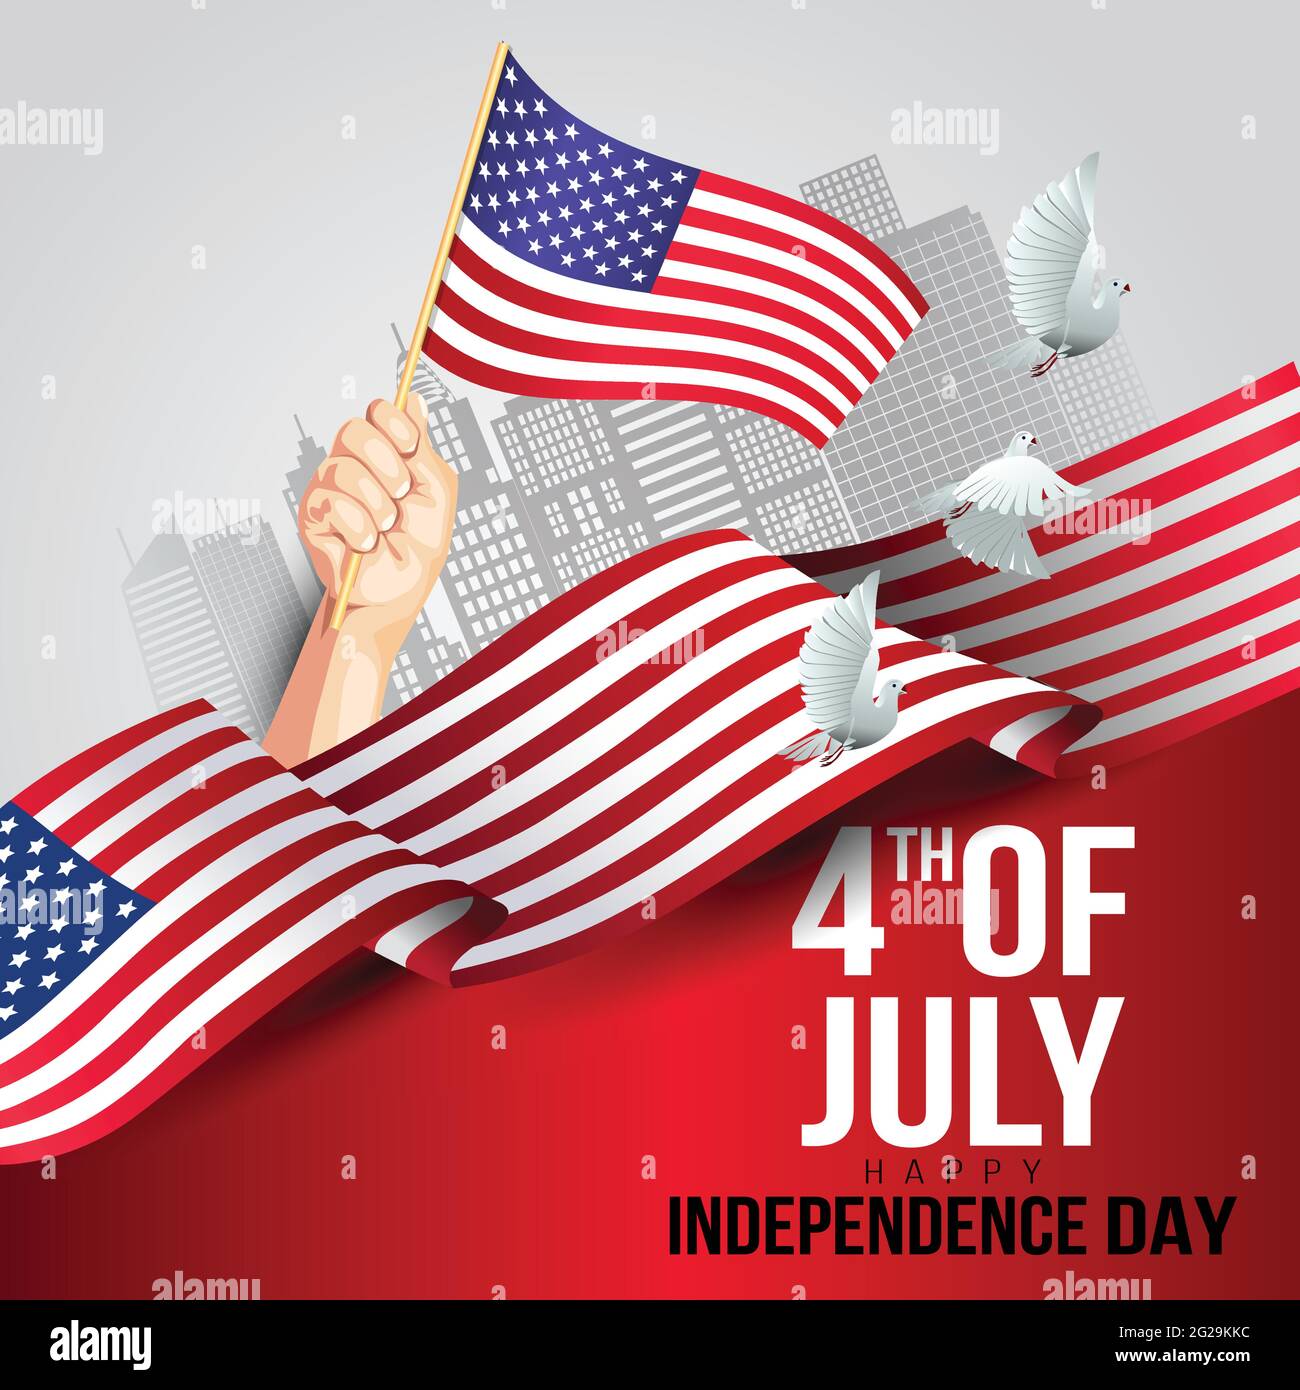 happy independence day America. hands holding with American flag. vector illustration design. Stock Vector